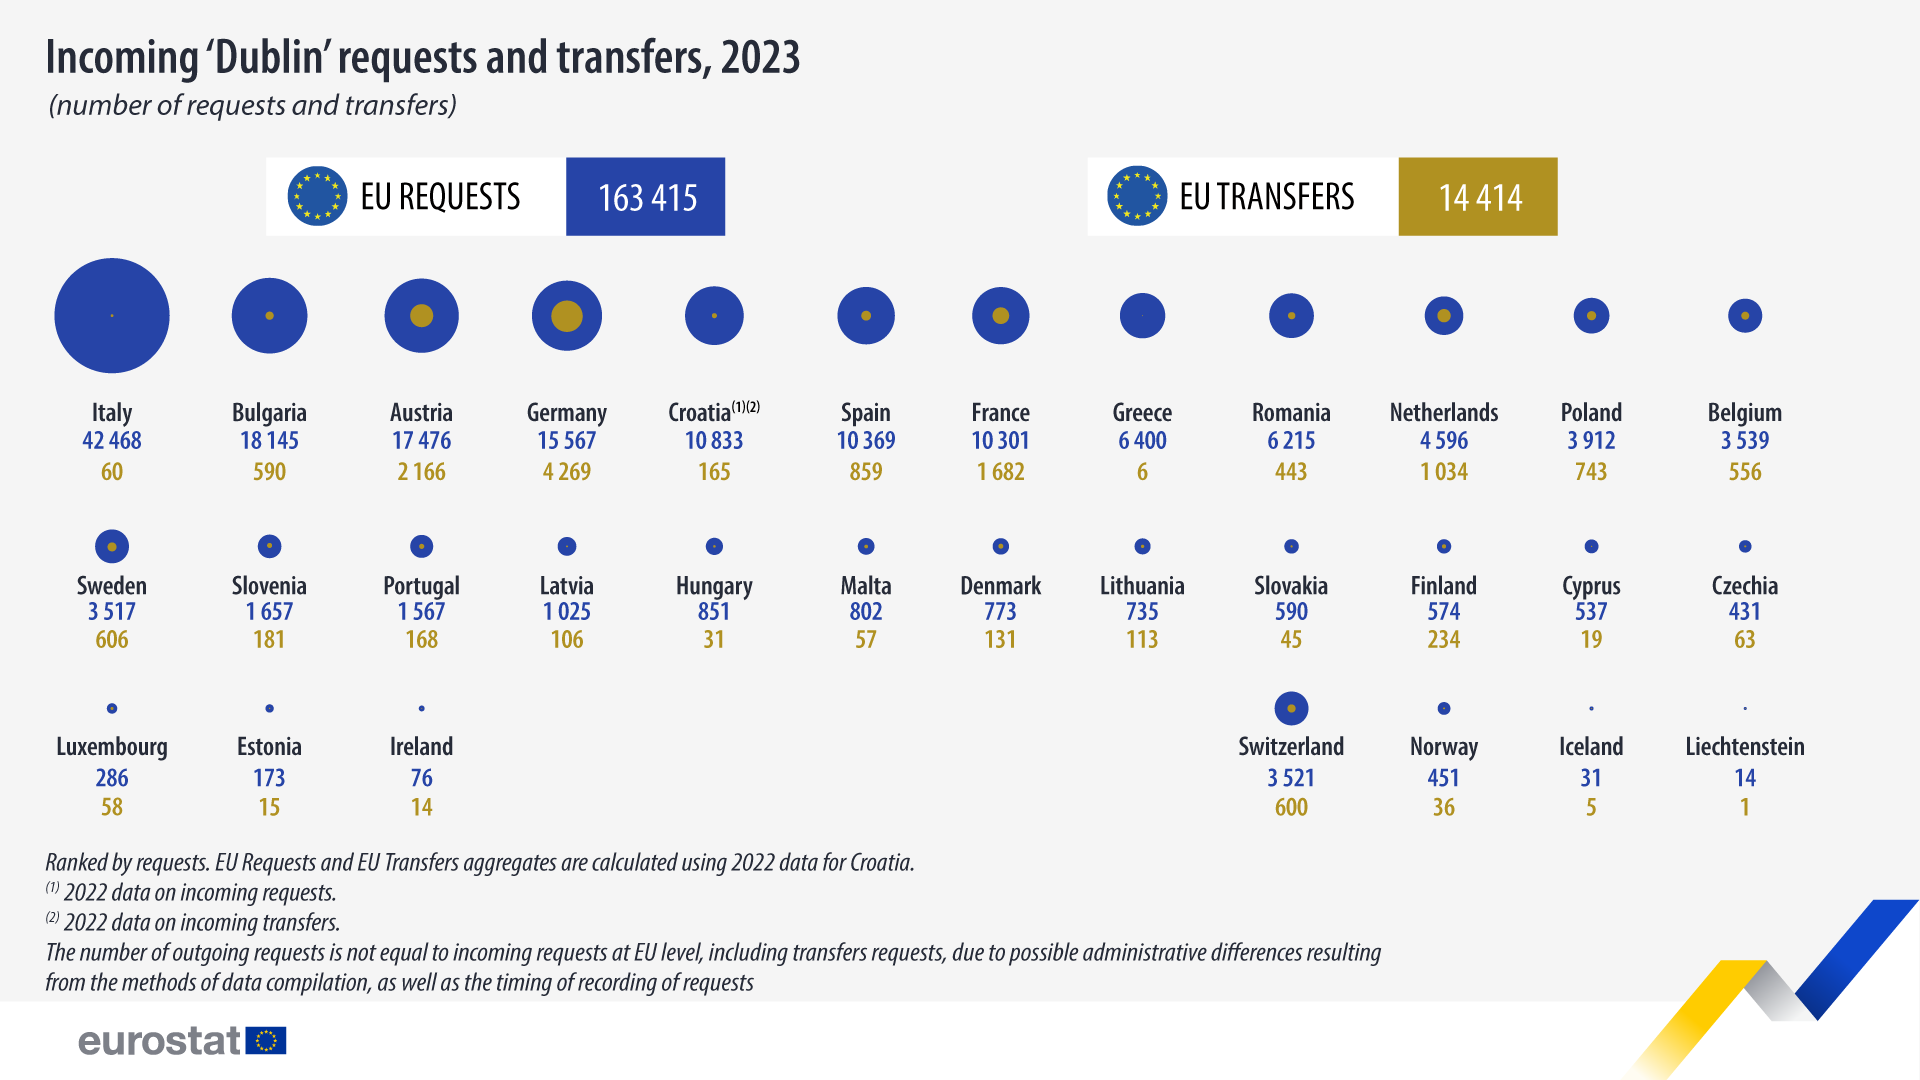 Incoming ´Dublin´ requests and transfers, number of requests and transfers, 2023. Infographic. See link to full dataset below.